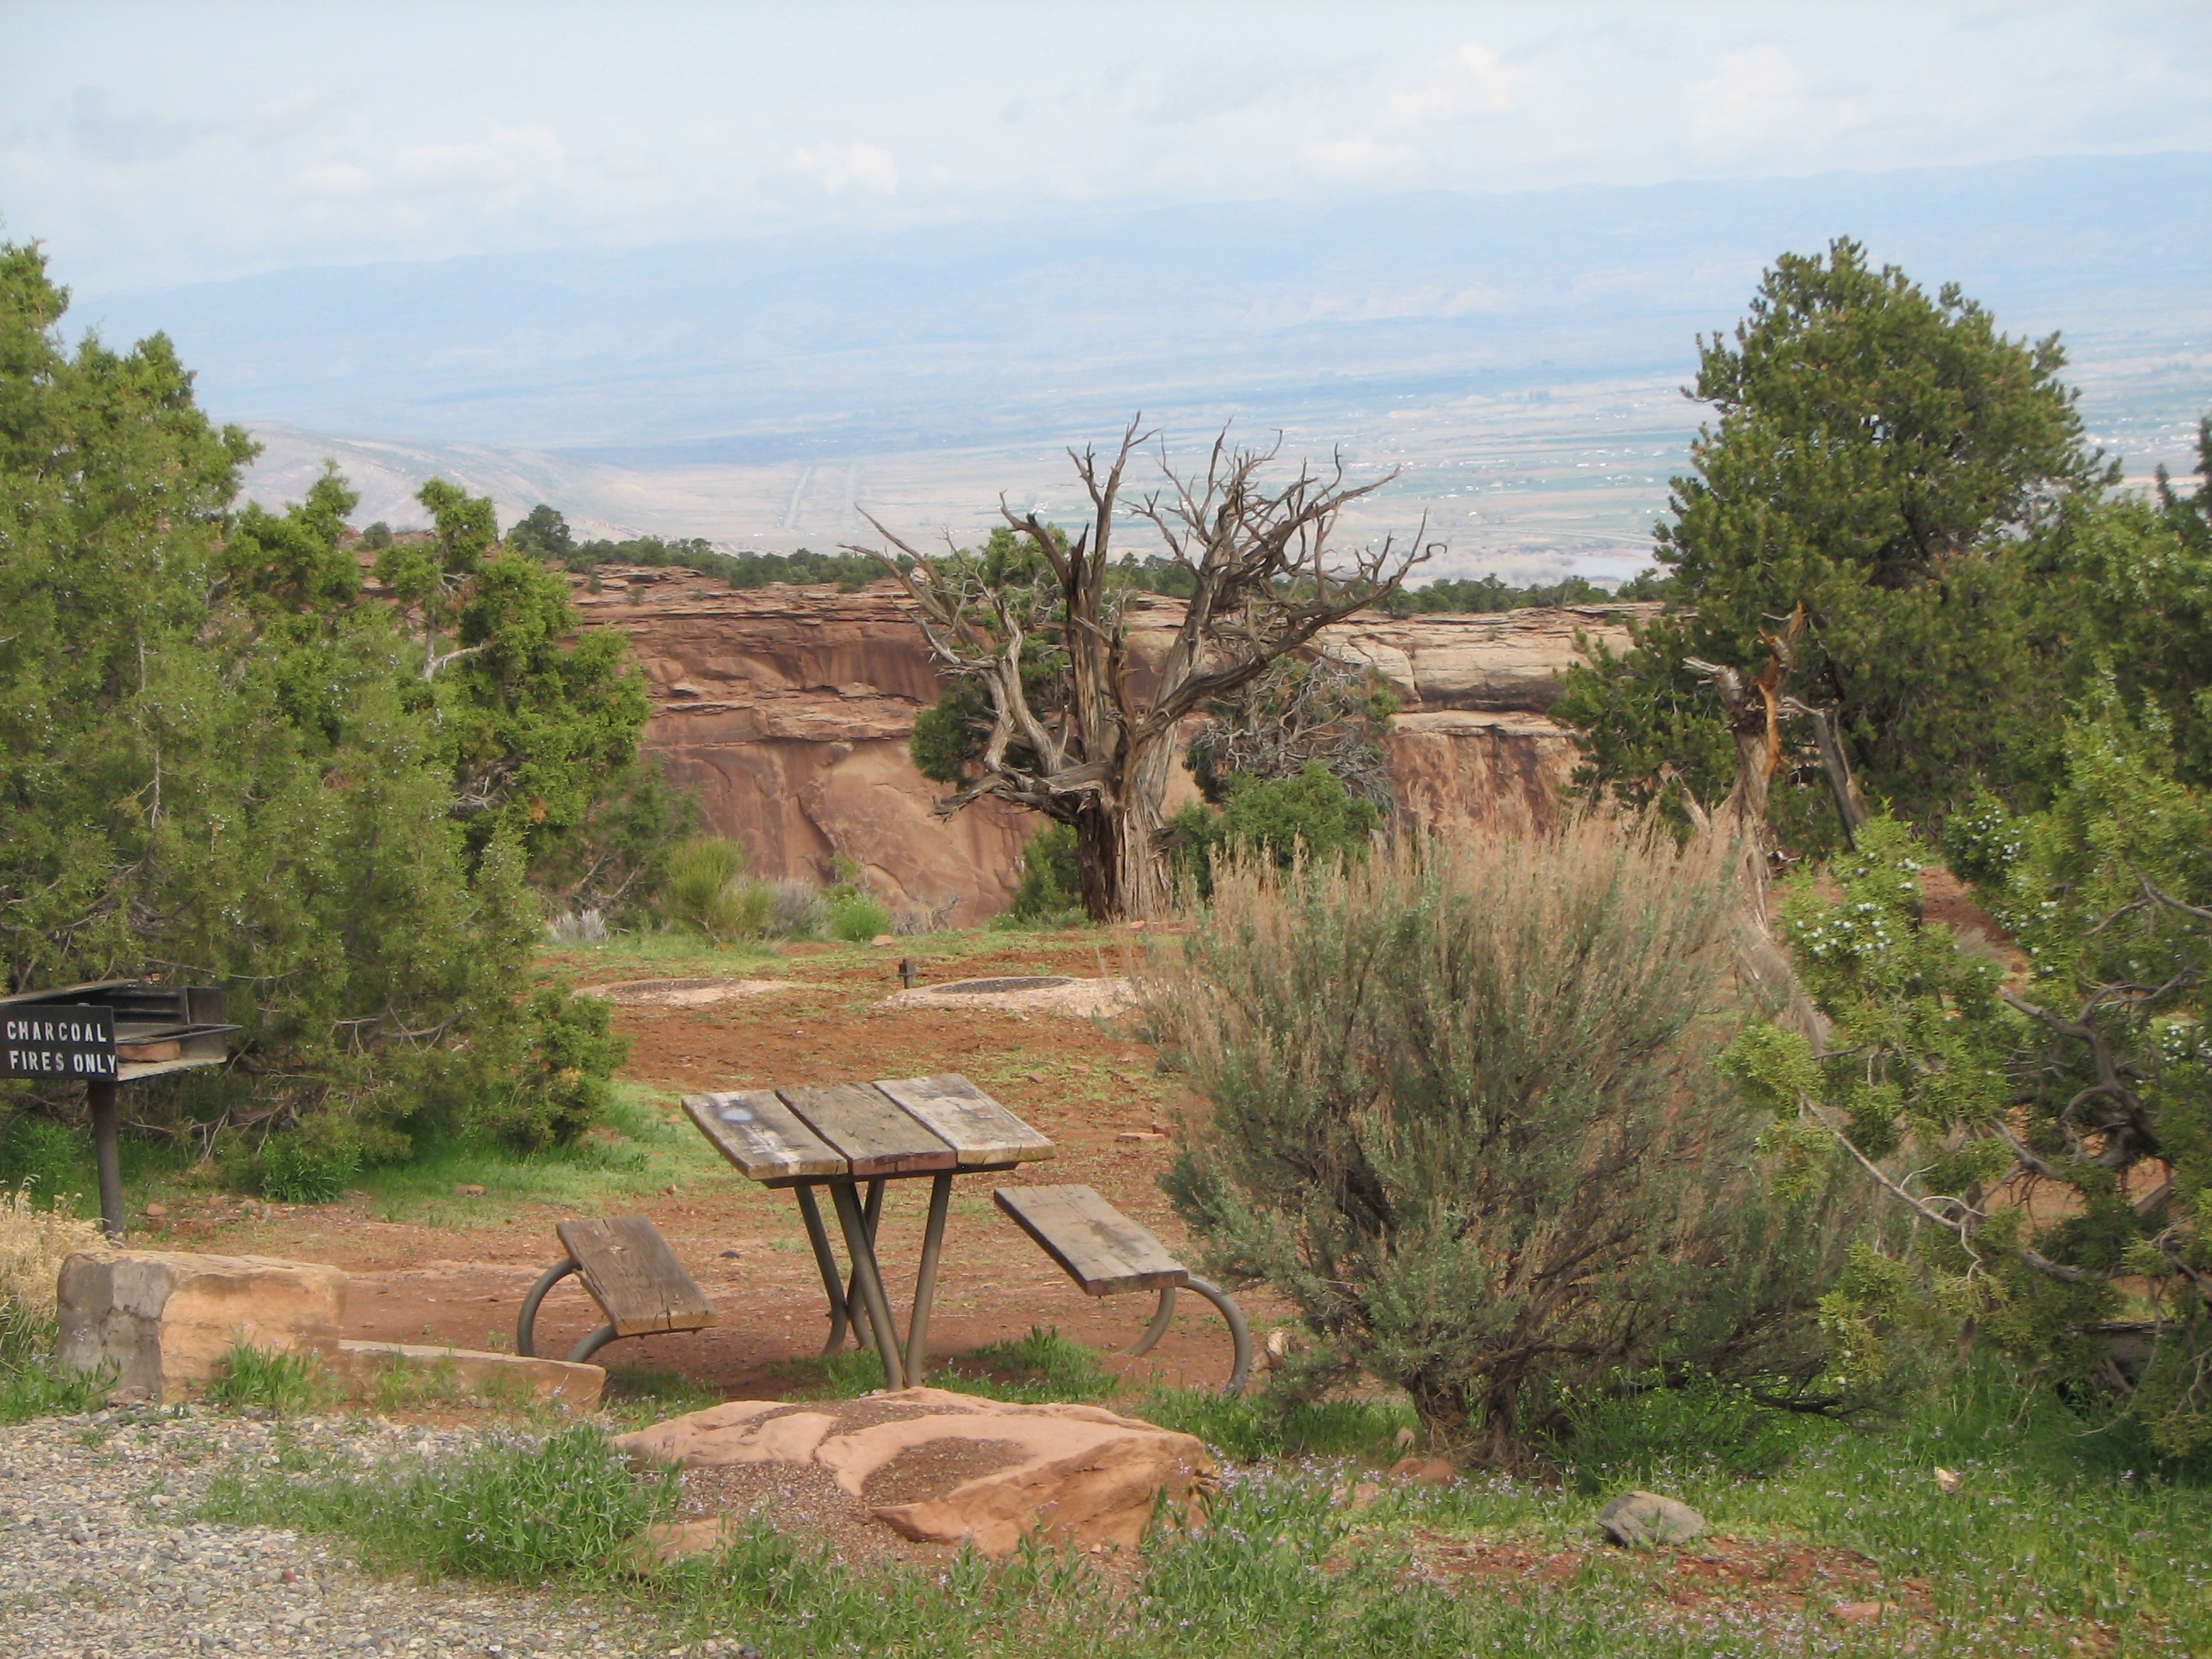 Picnic table nestled among the trees with a view of canyon beyond.